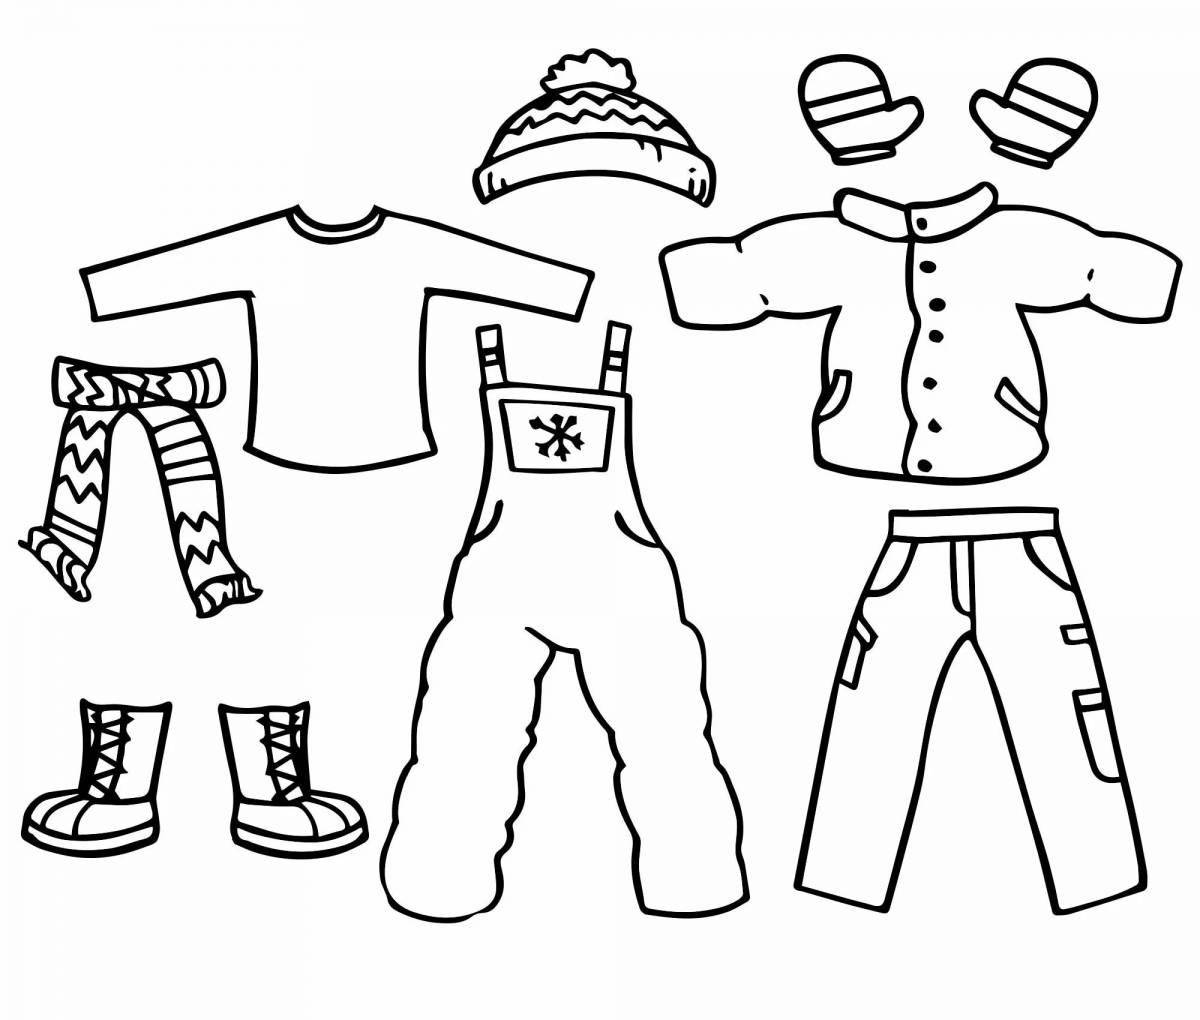 Fashion coloring page